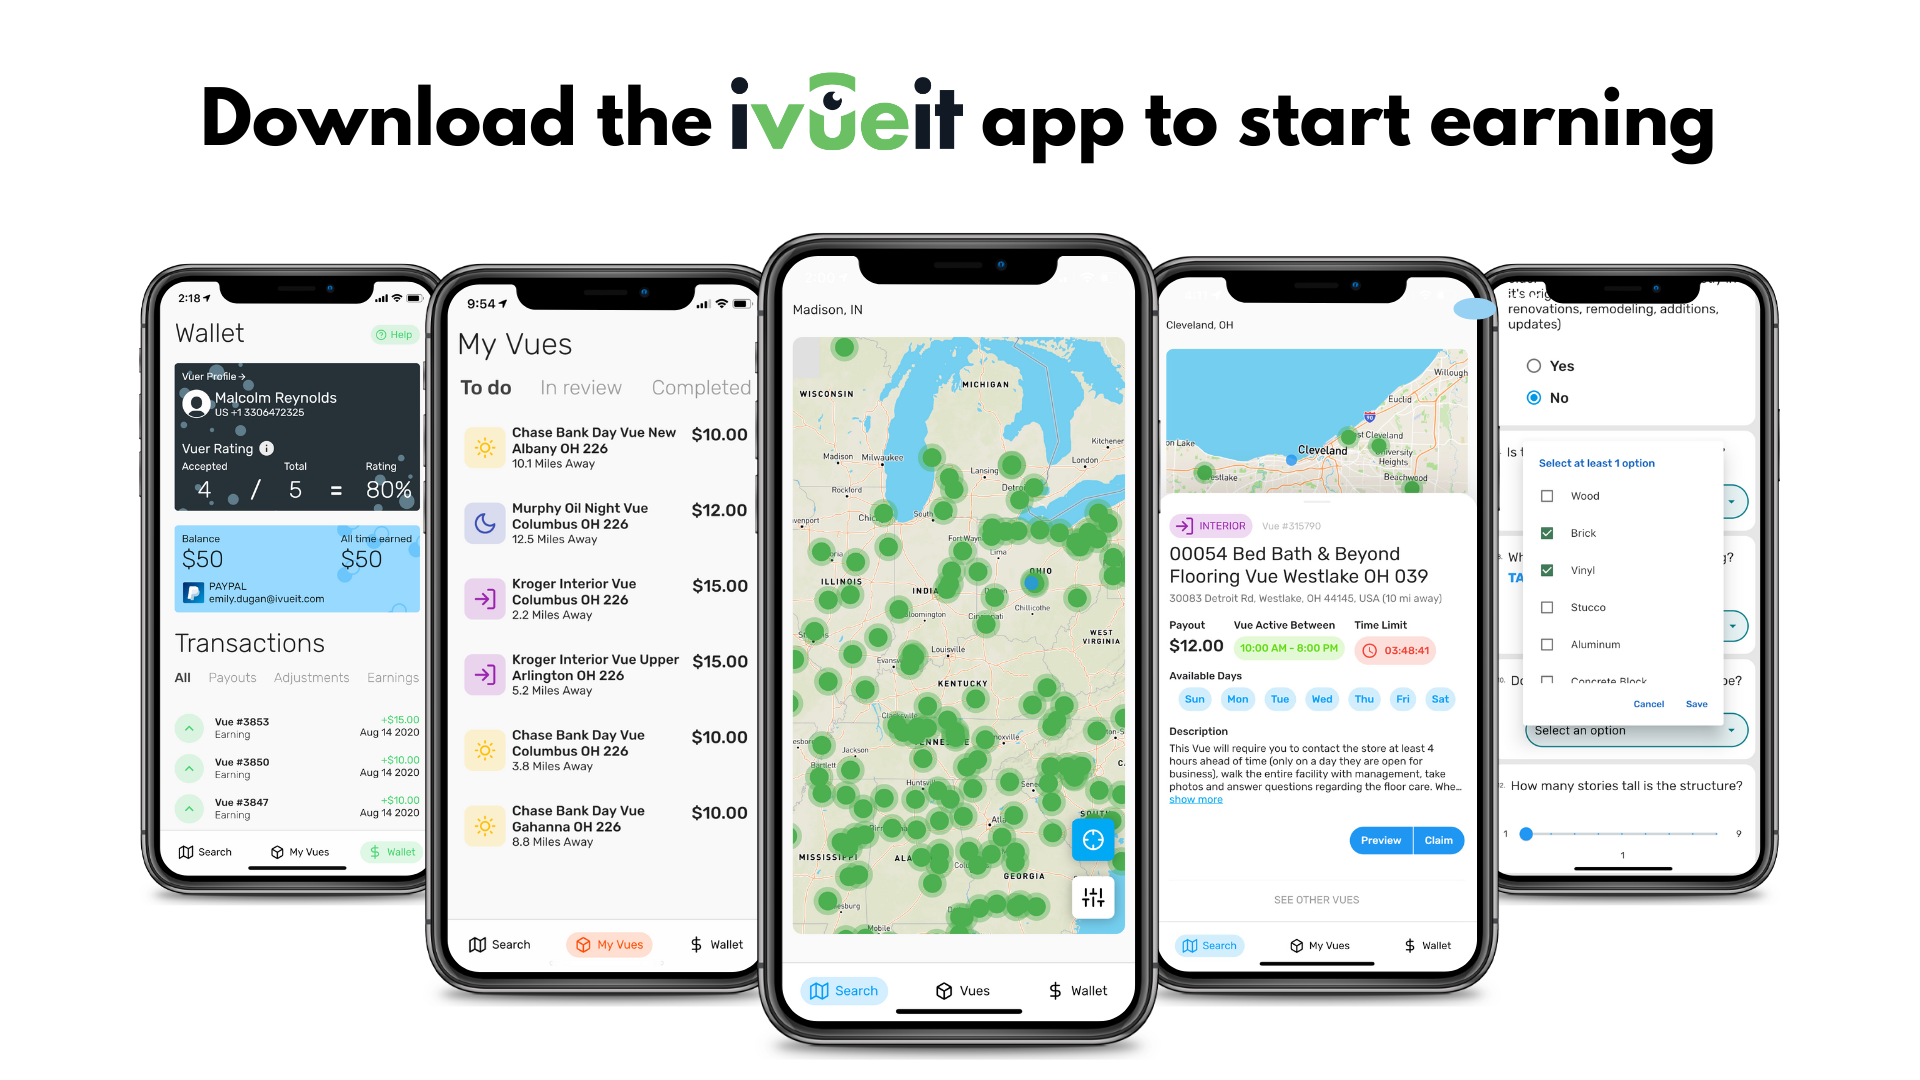 download the iVueit app on your smartphone device to start earning today